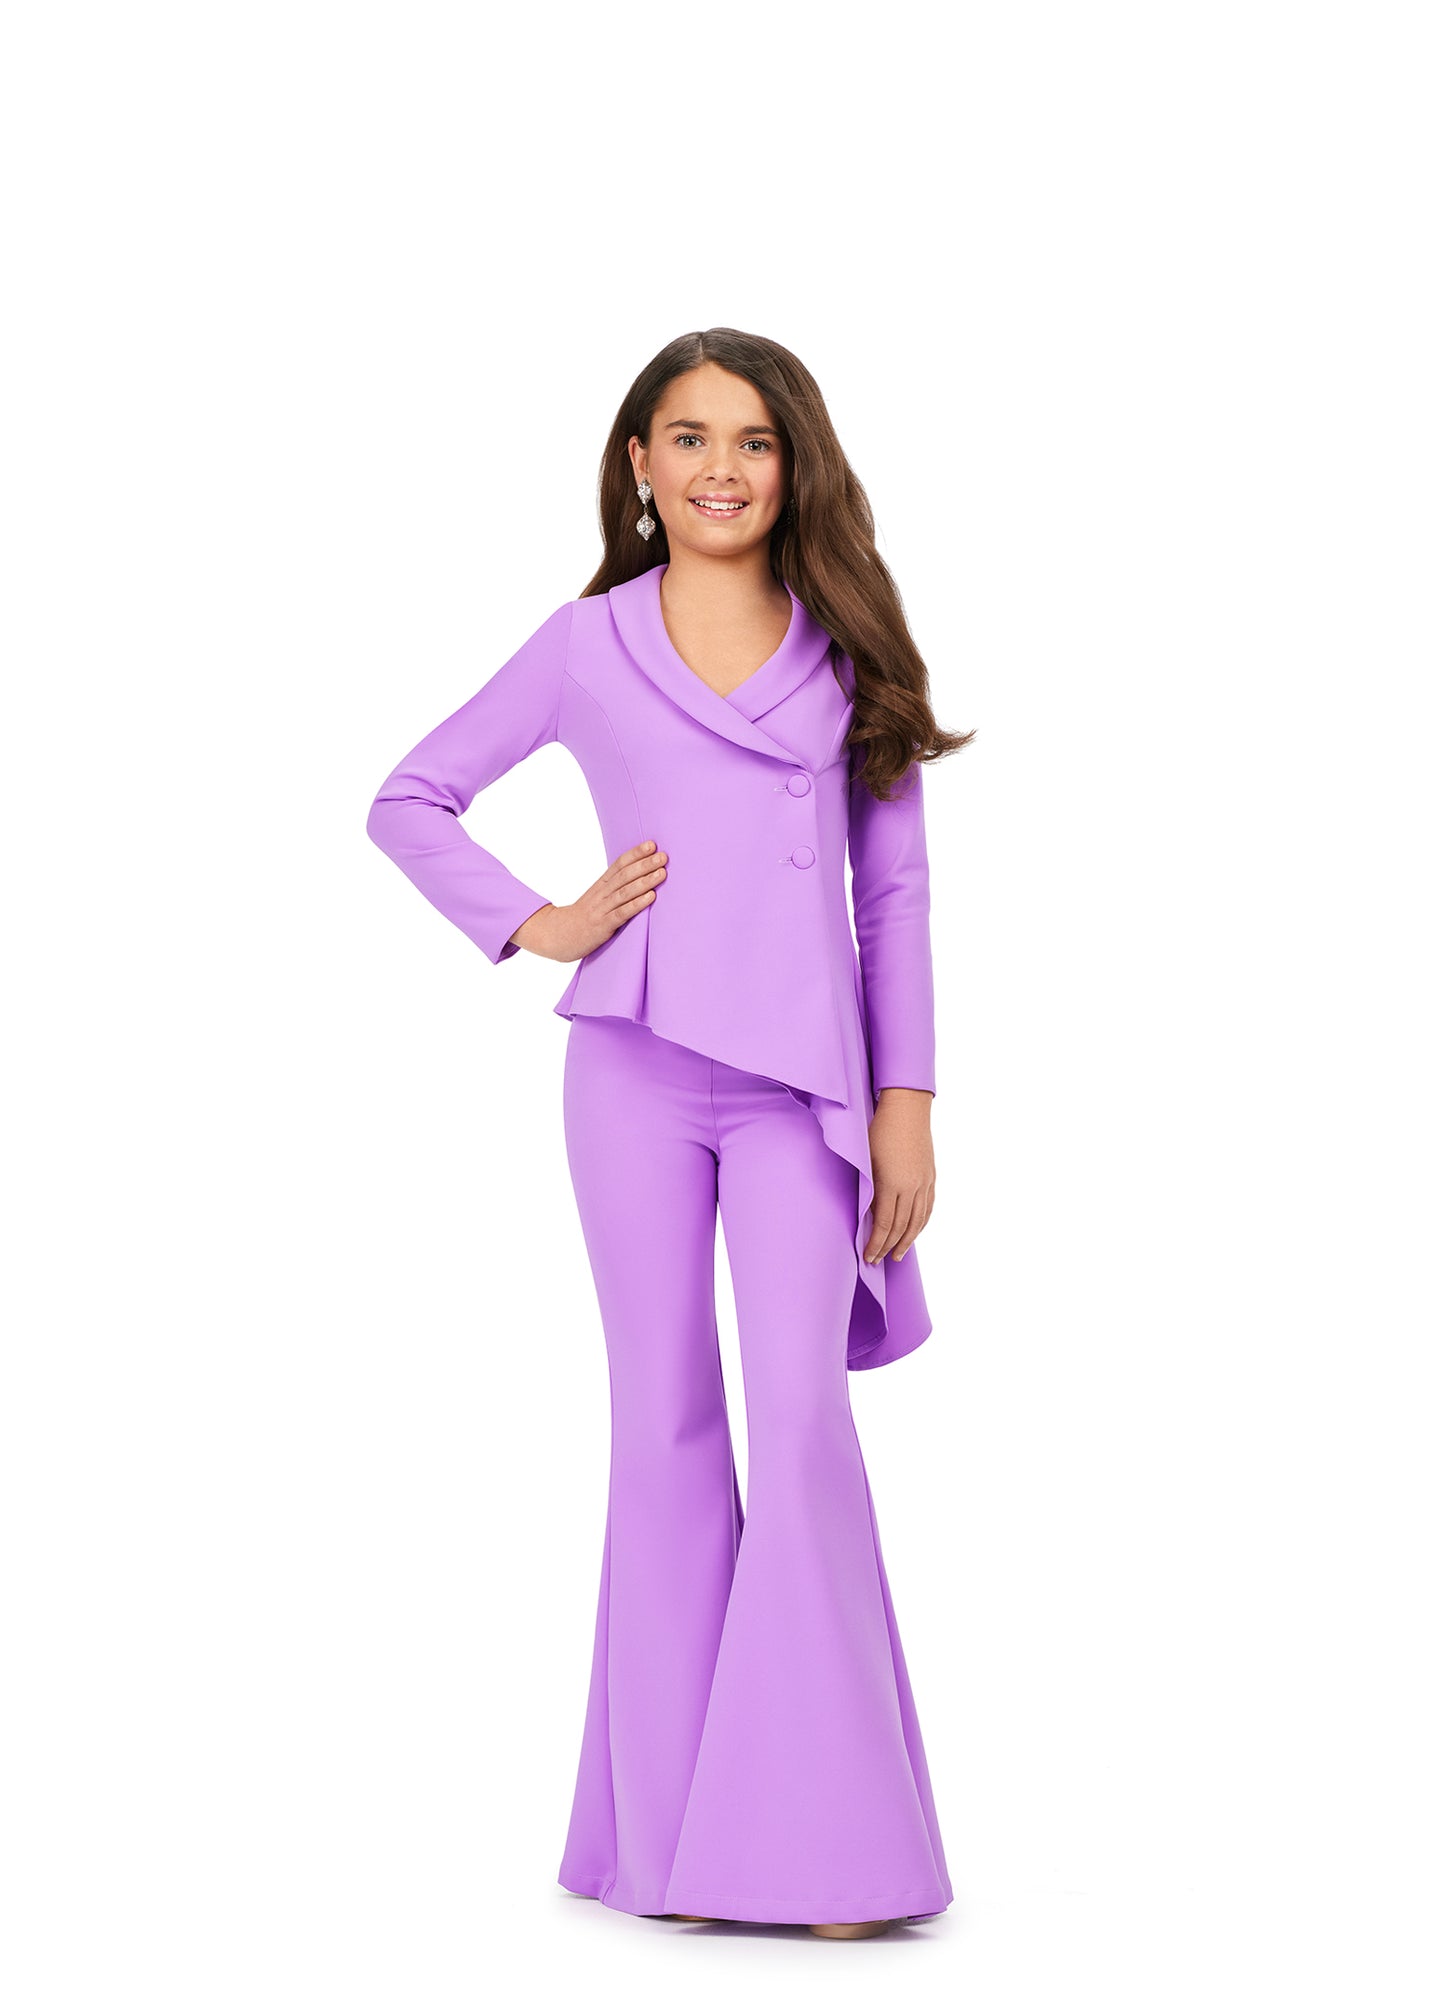 The Ashley Lauren Girls 8207 Long Sleeve Two Piece Scuba Jumpsuit is the perfect choice for any special occasion. This stylish two piece features an asymmetric hem and flare pant legs, perfect for making a statement while maintaining a professional look. With this time-tested jumpsuit, make a lasting impression on the pageant or job interview platform.  Sizes: 4-16  Colors: Orchid, Hot Pink, Green